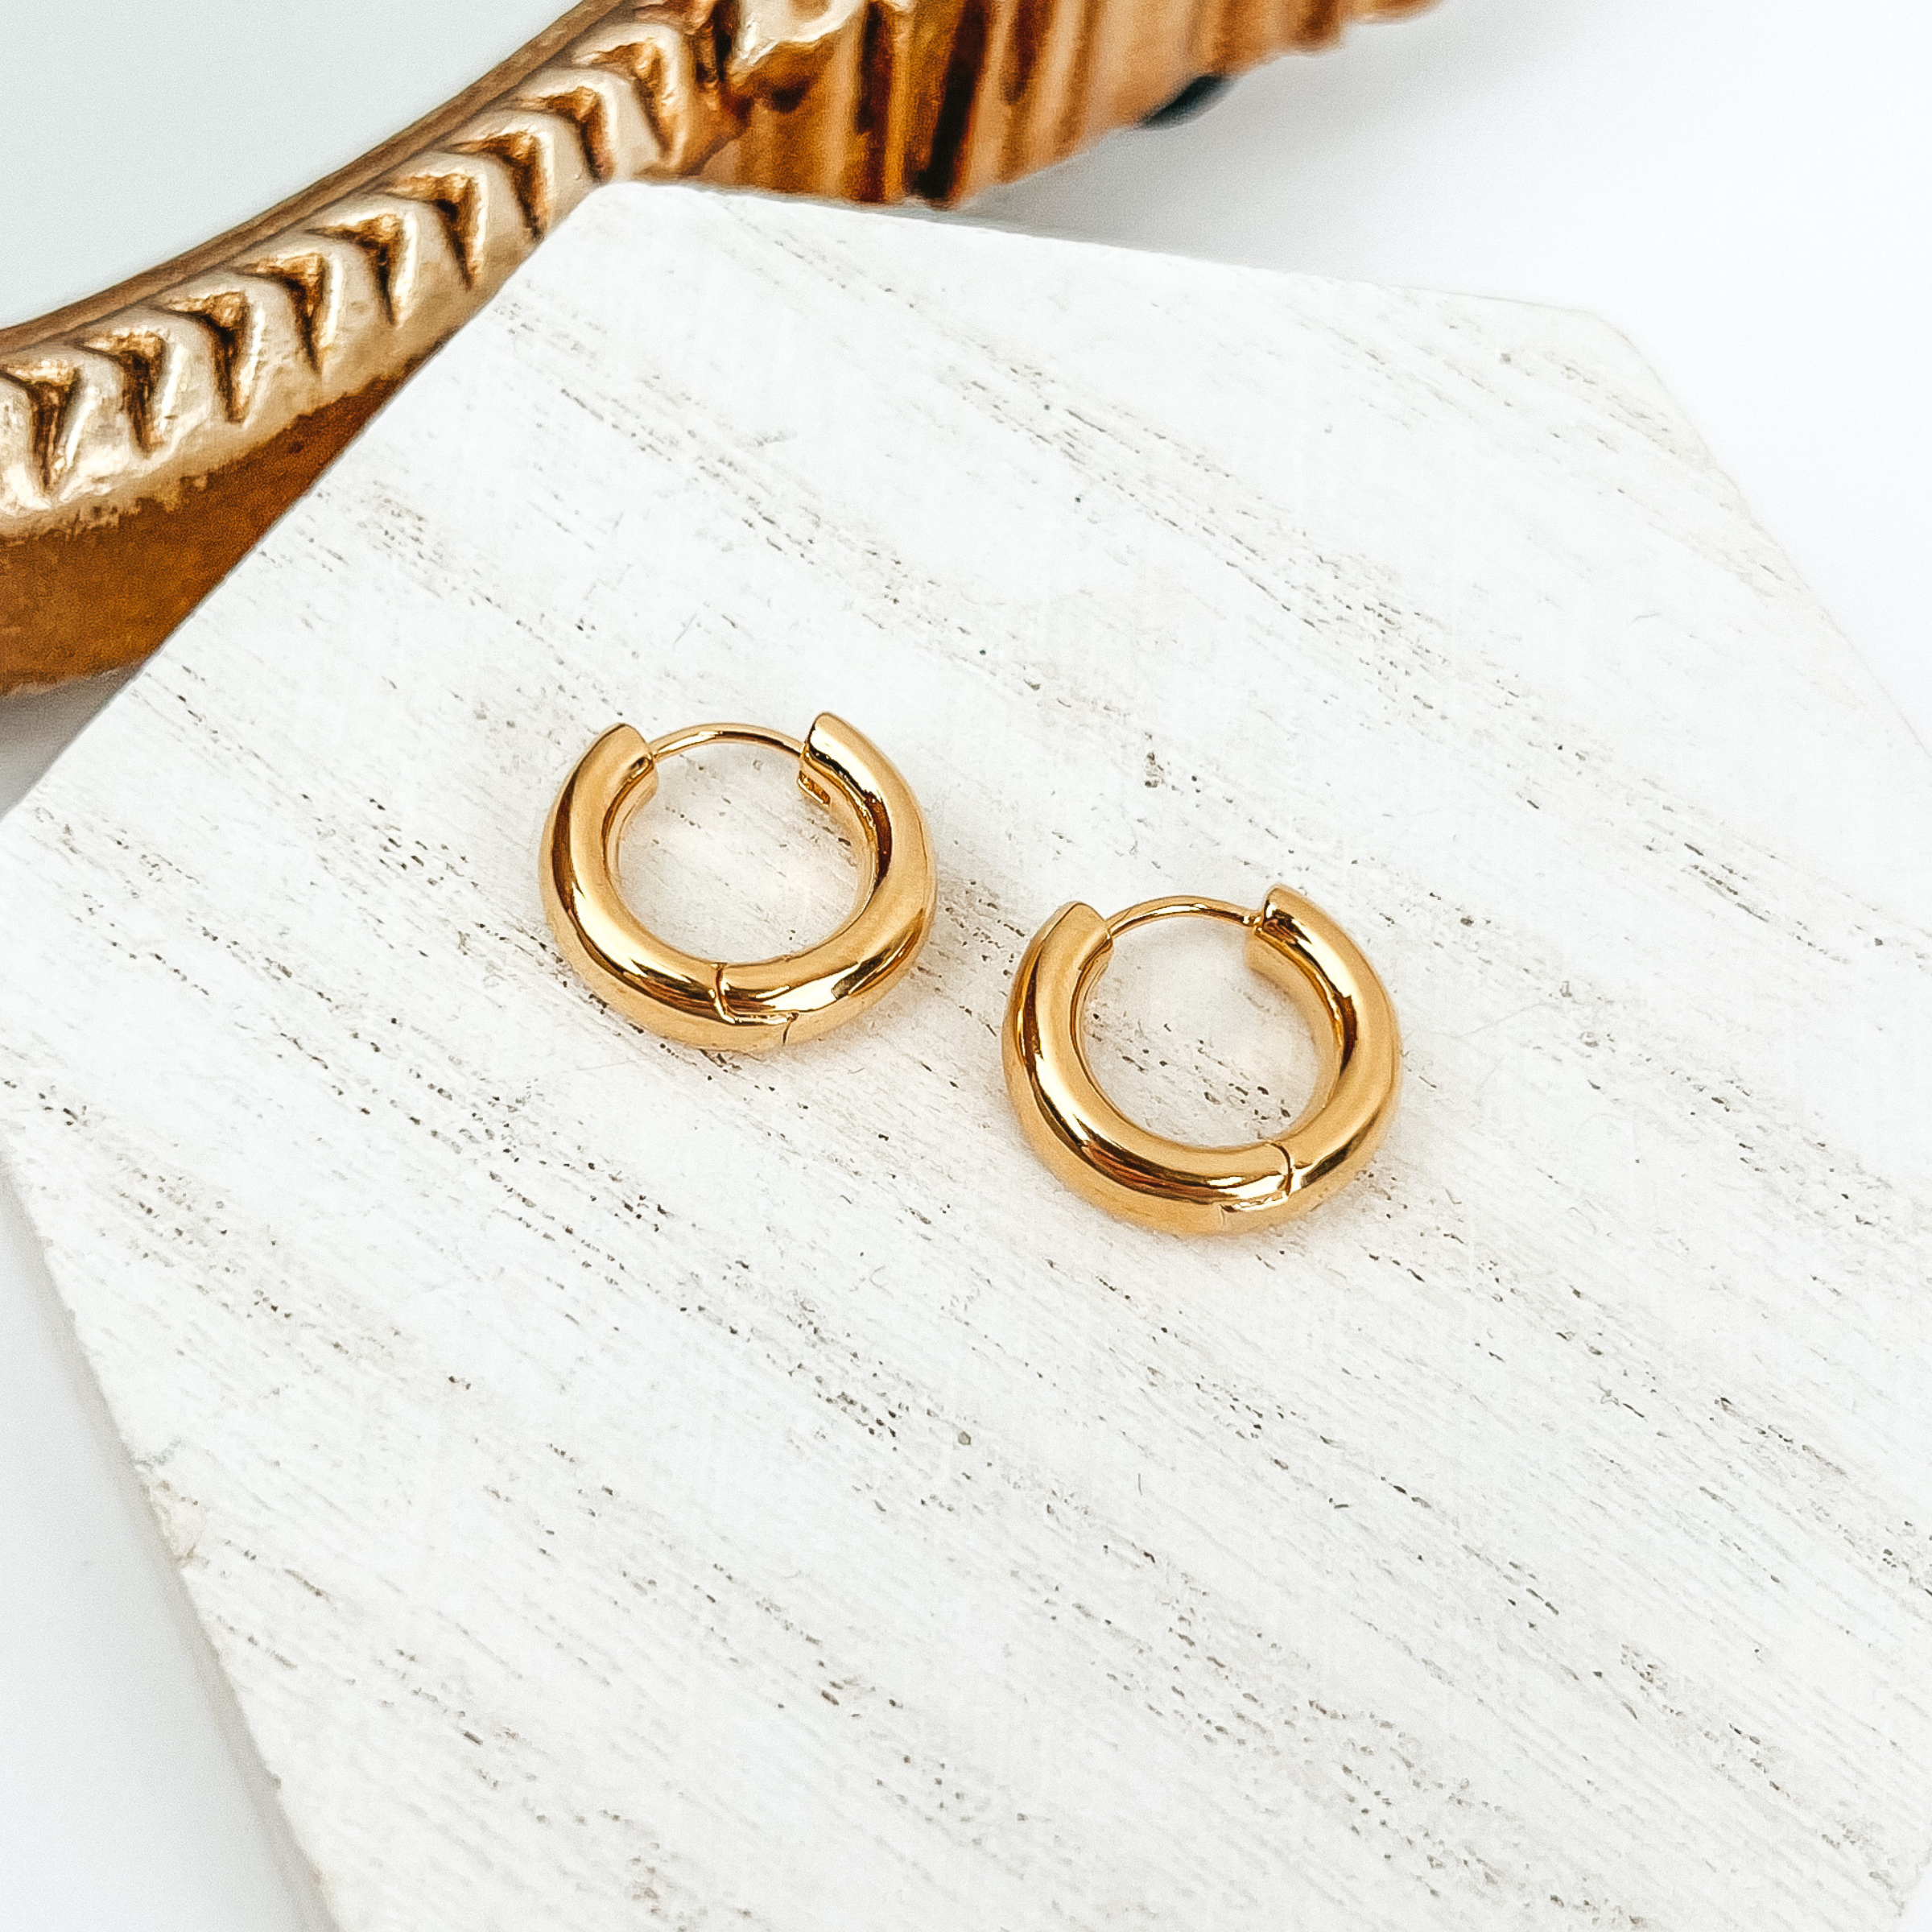 Gold hoop earrings pictured on a white block on a white background. There is also a gold mirror in the top left corner.